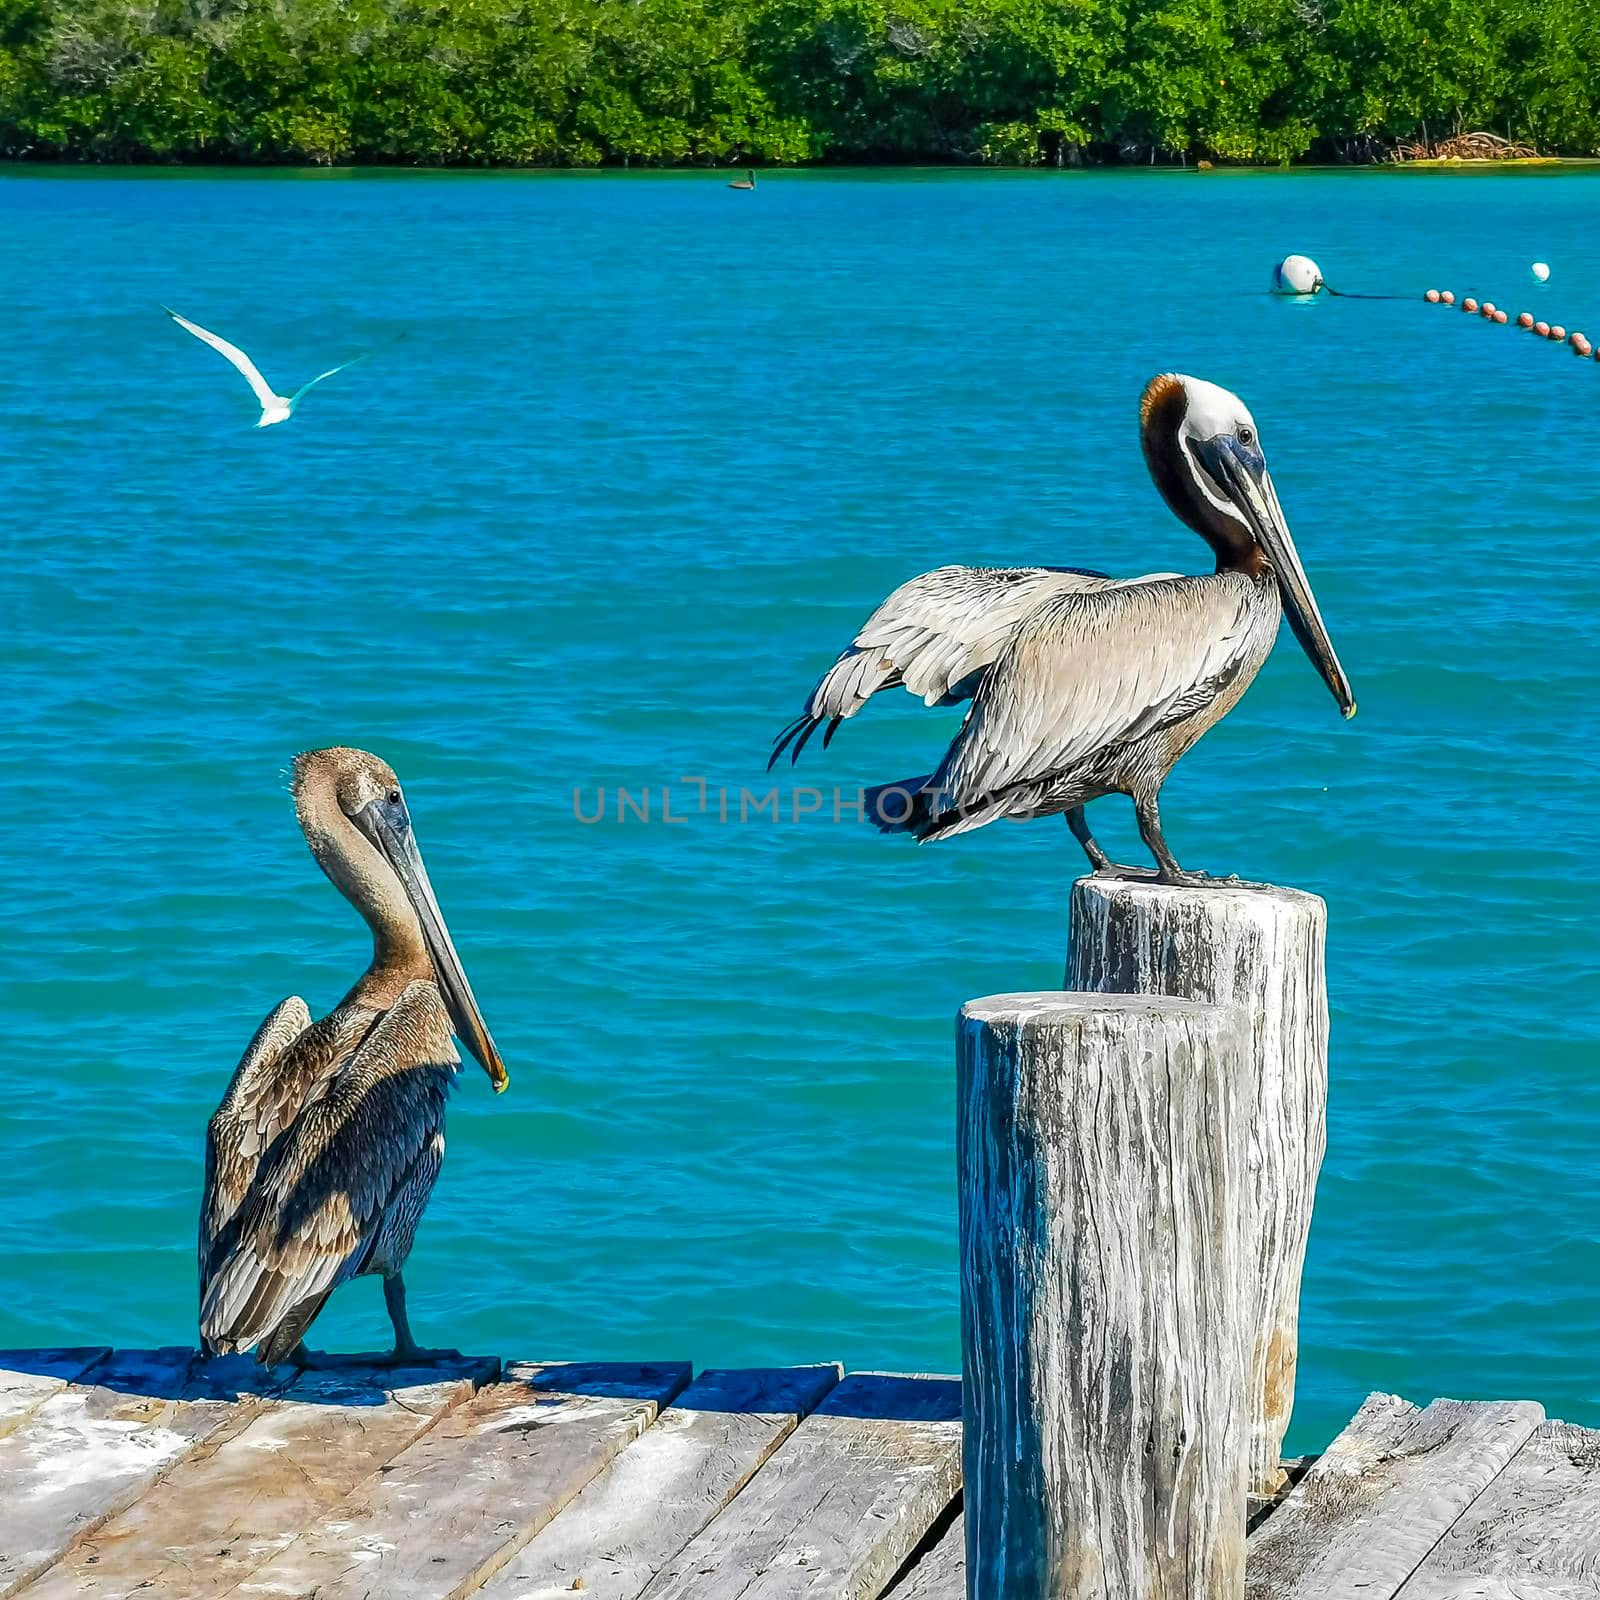 Pelicans seagull birds on port of Contoy island in Mexico. by Arkadij